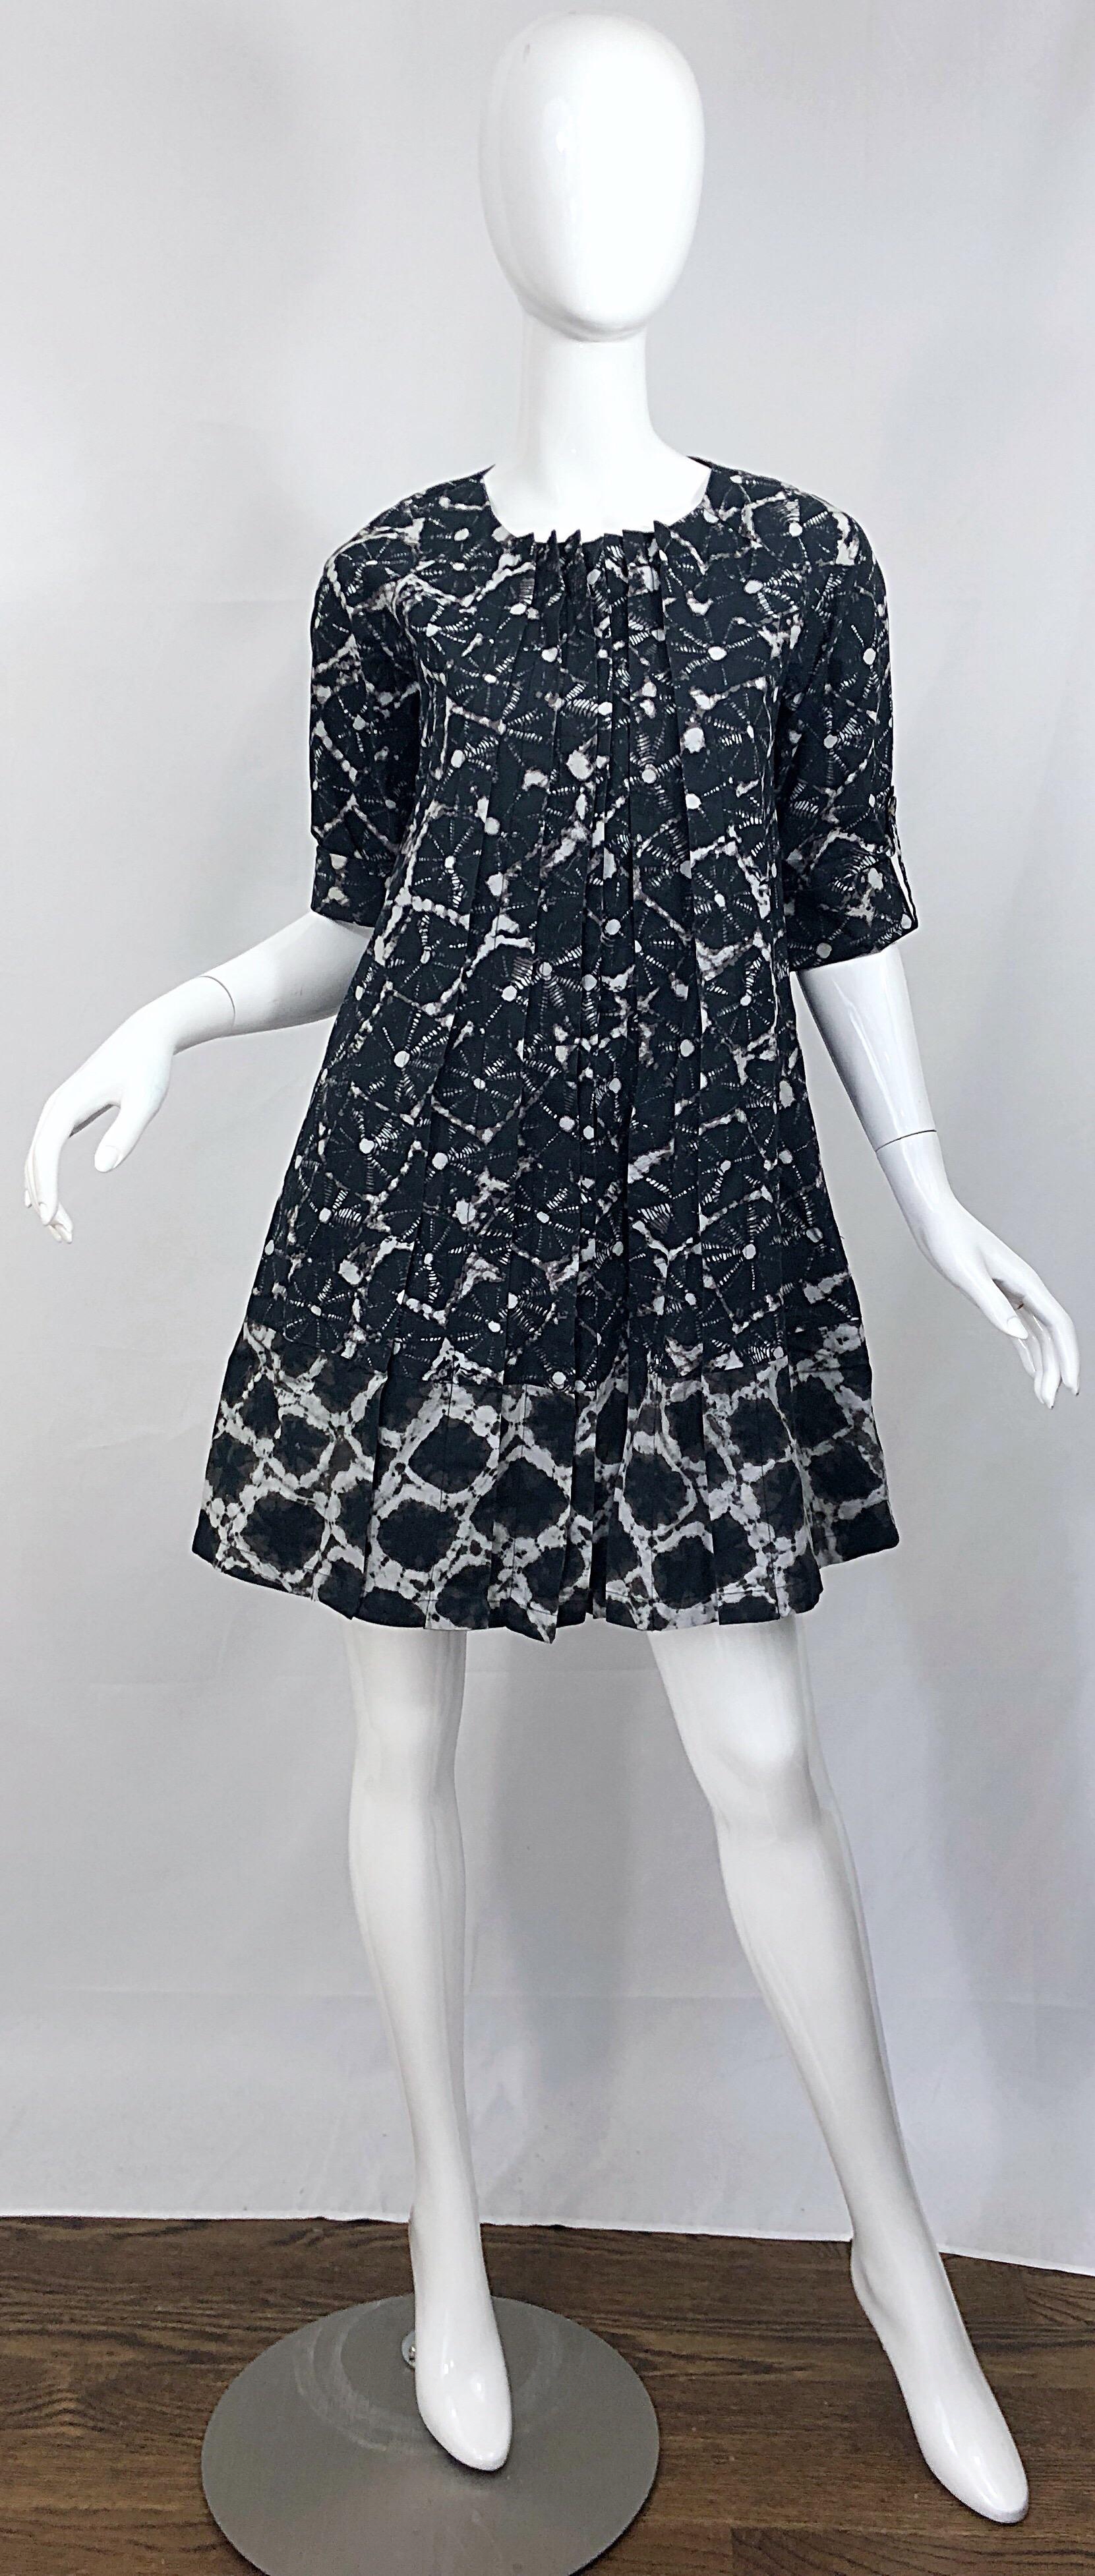 New THAKOON Spring 2008 black and white tie dye abstract print cotton trapeze swing dress / jacket! Features pleating up the front. Sleeves roll up with button strap closure. Hidden buttons up the front. POCKETS at each side of the hips. Can easily